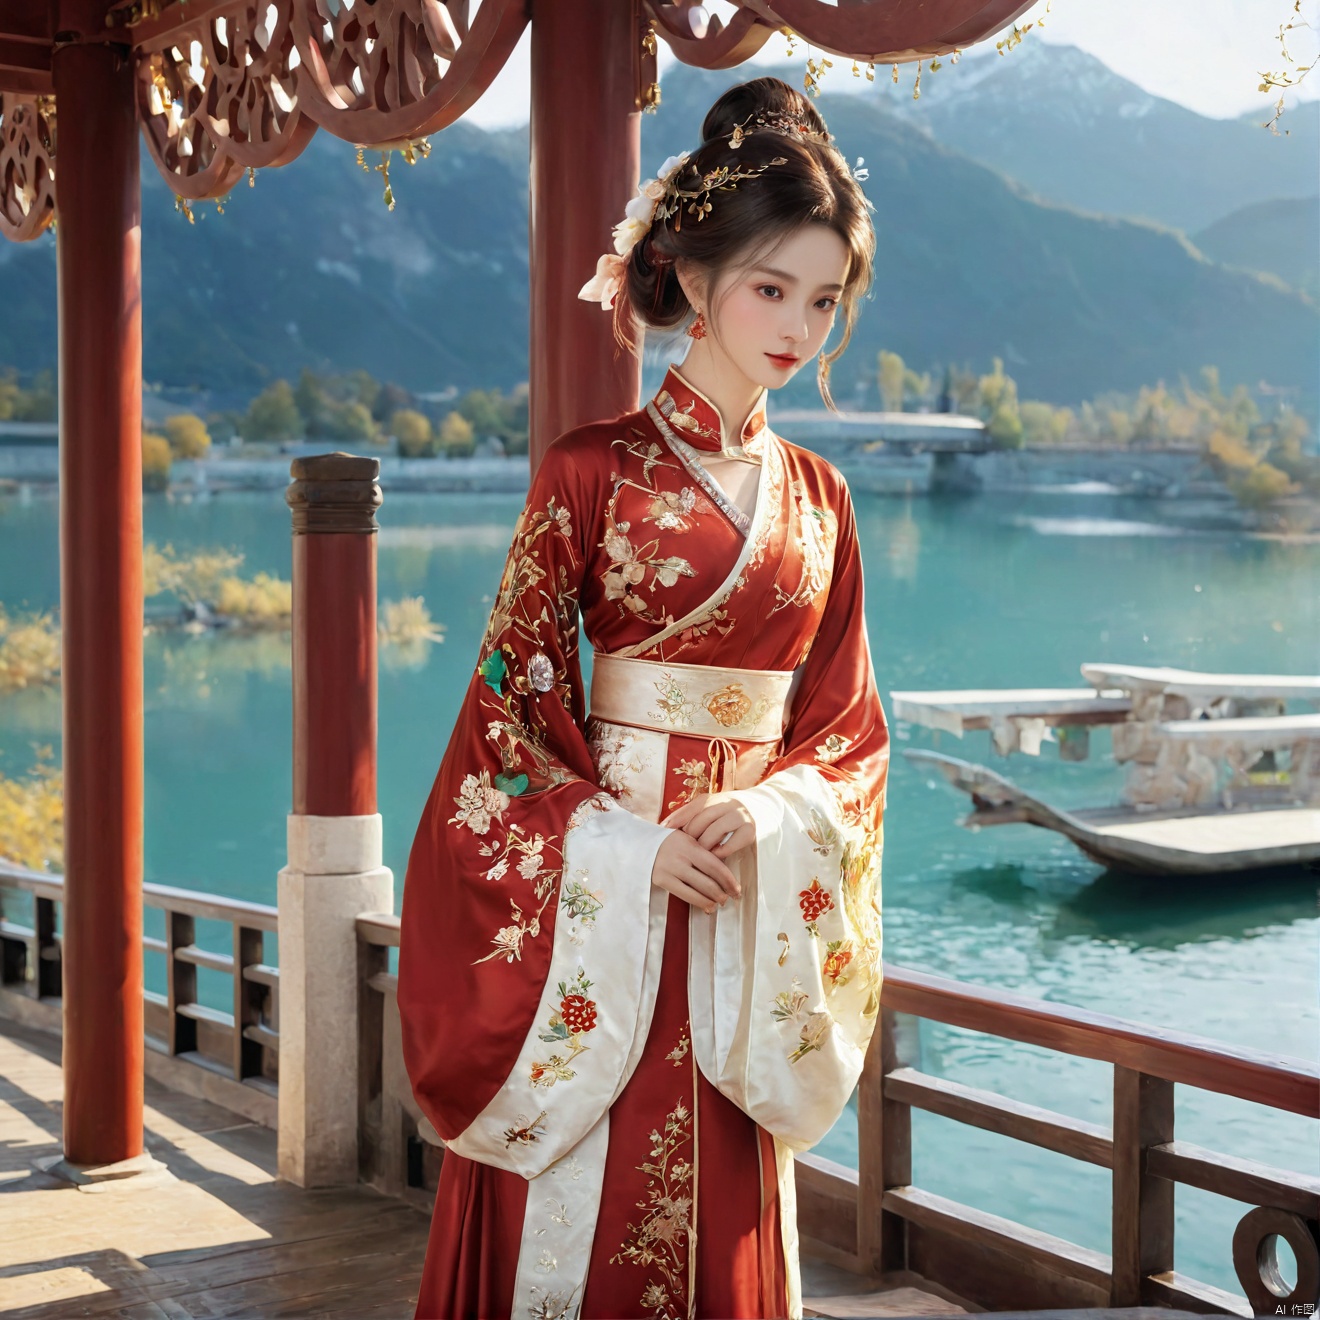  photorealistic,realistic,masterpiece,best quality,4k,,
A girl standing near the bridge over the lake, Wear new Chinese clothing that combines traditional Chinese Hanfu and modern clothing elements, Showing a unique oriental charm. Her clothes are mainly in red and white colors, With exquisite embroidery and beadwork, Showing the profound heritage of Chinese traditional culture. Her hairstyle is simple yet elegant, Wearing gorgeous hair accessories, Adds a splash of color to the overall look. Her makeup is delicate and elegant, Highlighting her natural beauty. Her eyes are bright and energetic, It seemed to be telling her inner story. Her skin is fair and delicate, Exudes a charming luster. Her figure is graceful and dignified, Exudes a noble temperament. She stood on the bridge by the lake, Behind you are the sparkling water and the mountains in the distance., It forms a beautiful picture. The sun shines on her body, Contrast between light and dark, highlighting her theme.